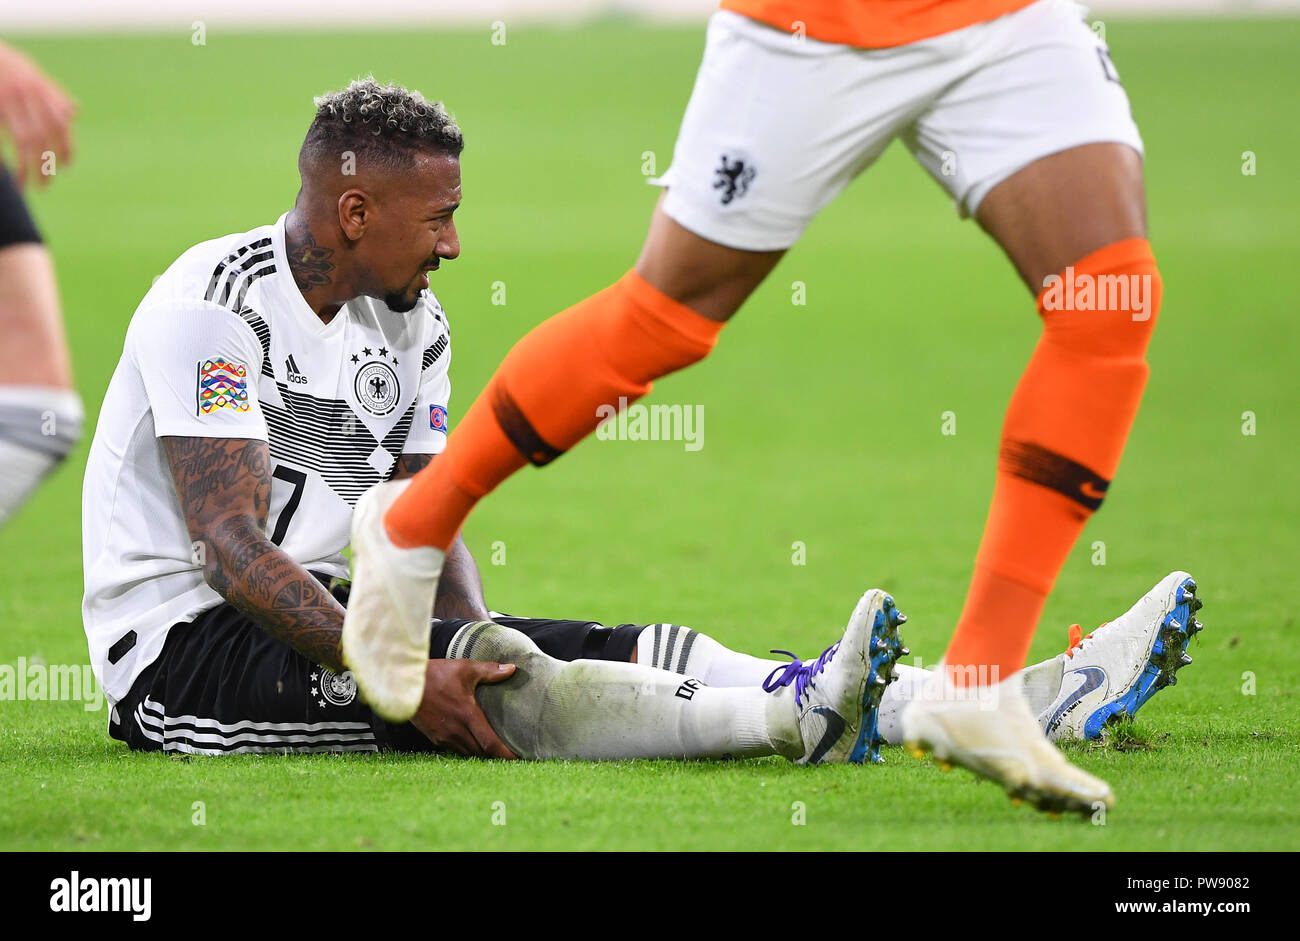 Injury, injured: after a duel, Jerome Boateng (Germany) sits on the ground and holds his right leg. GES/Football/Nations League: Netherlands - Germany, 13.10.2018 Football/Soccer: Nations League: Netherlands vs Germany, Amsterdam, October 13, 2018 | usage worldwide Stock Photo